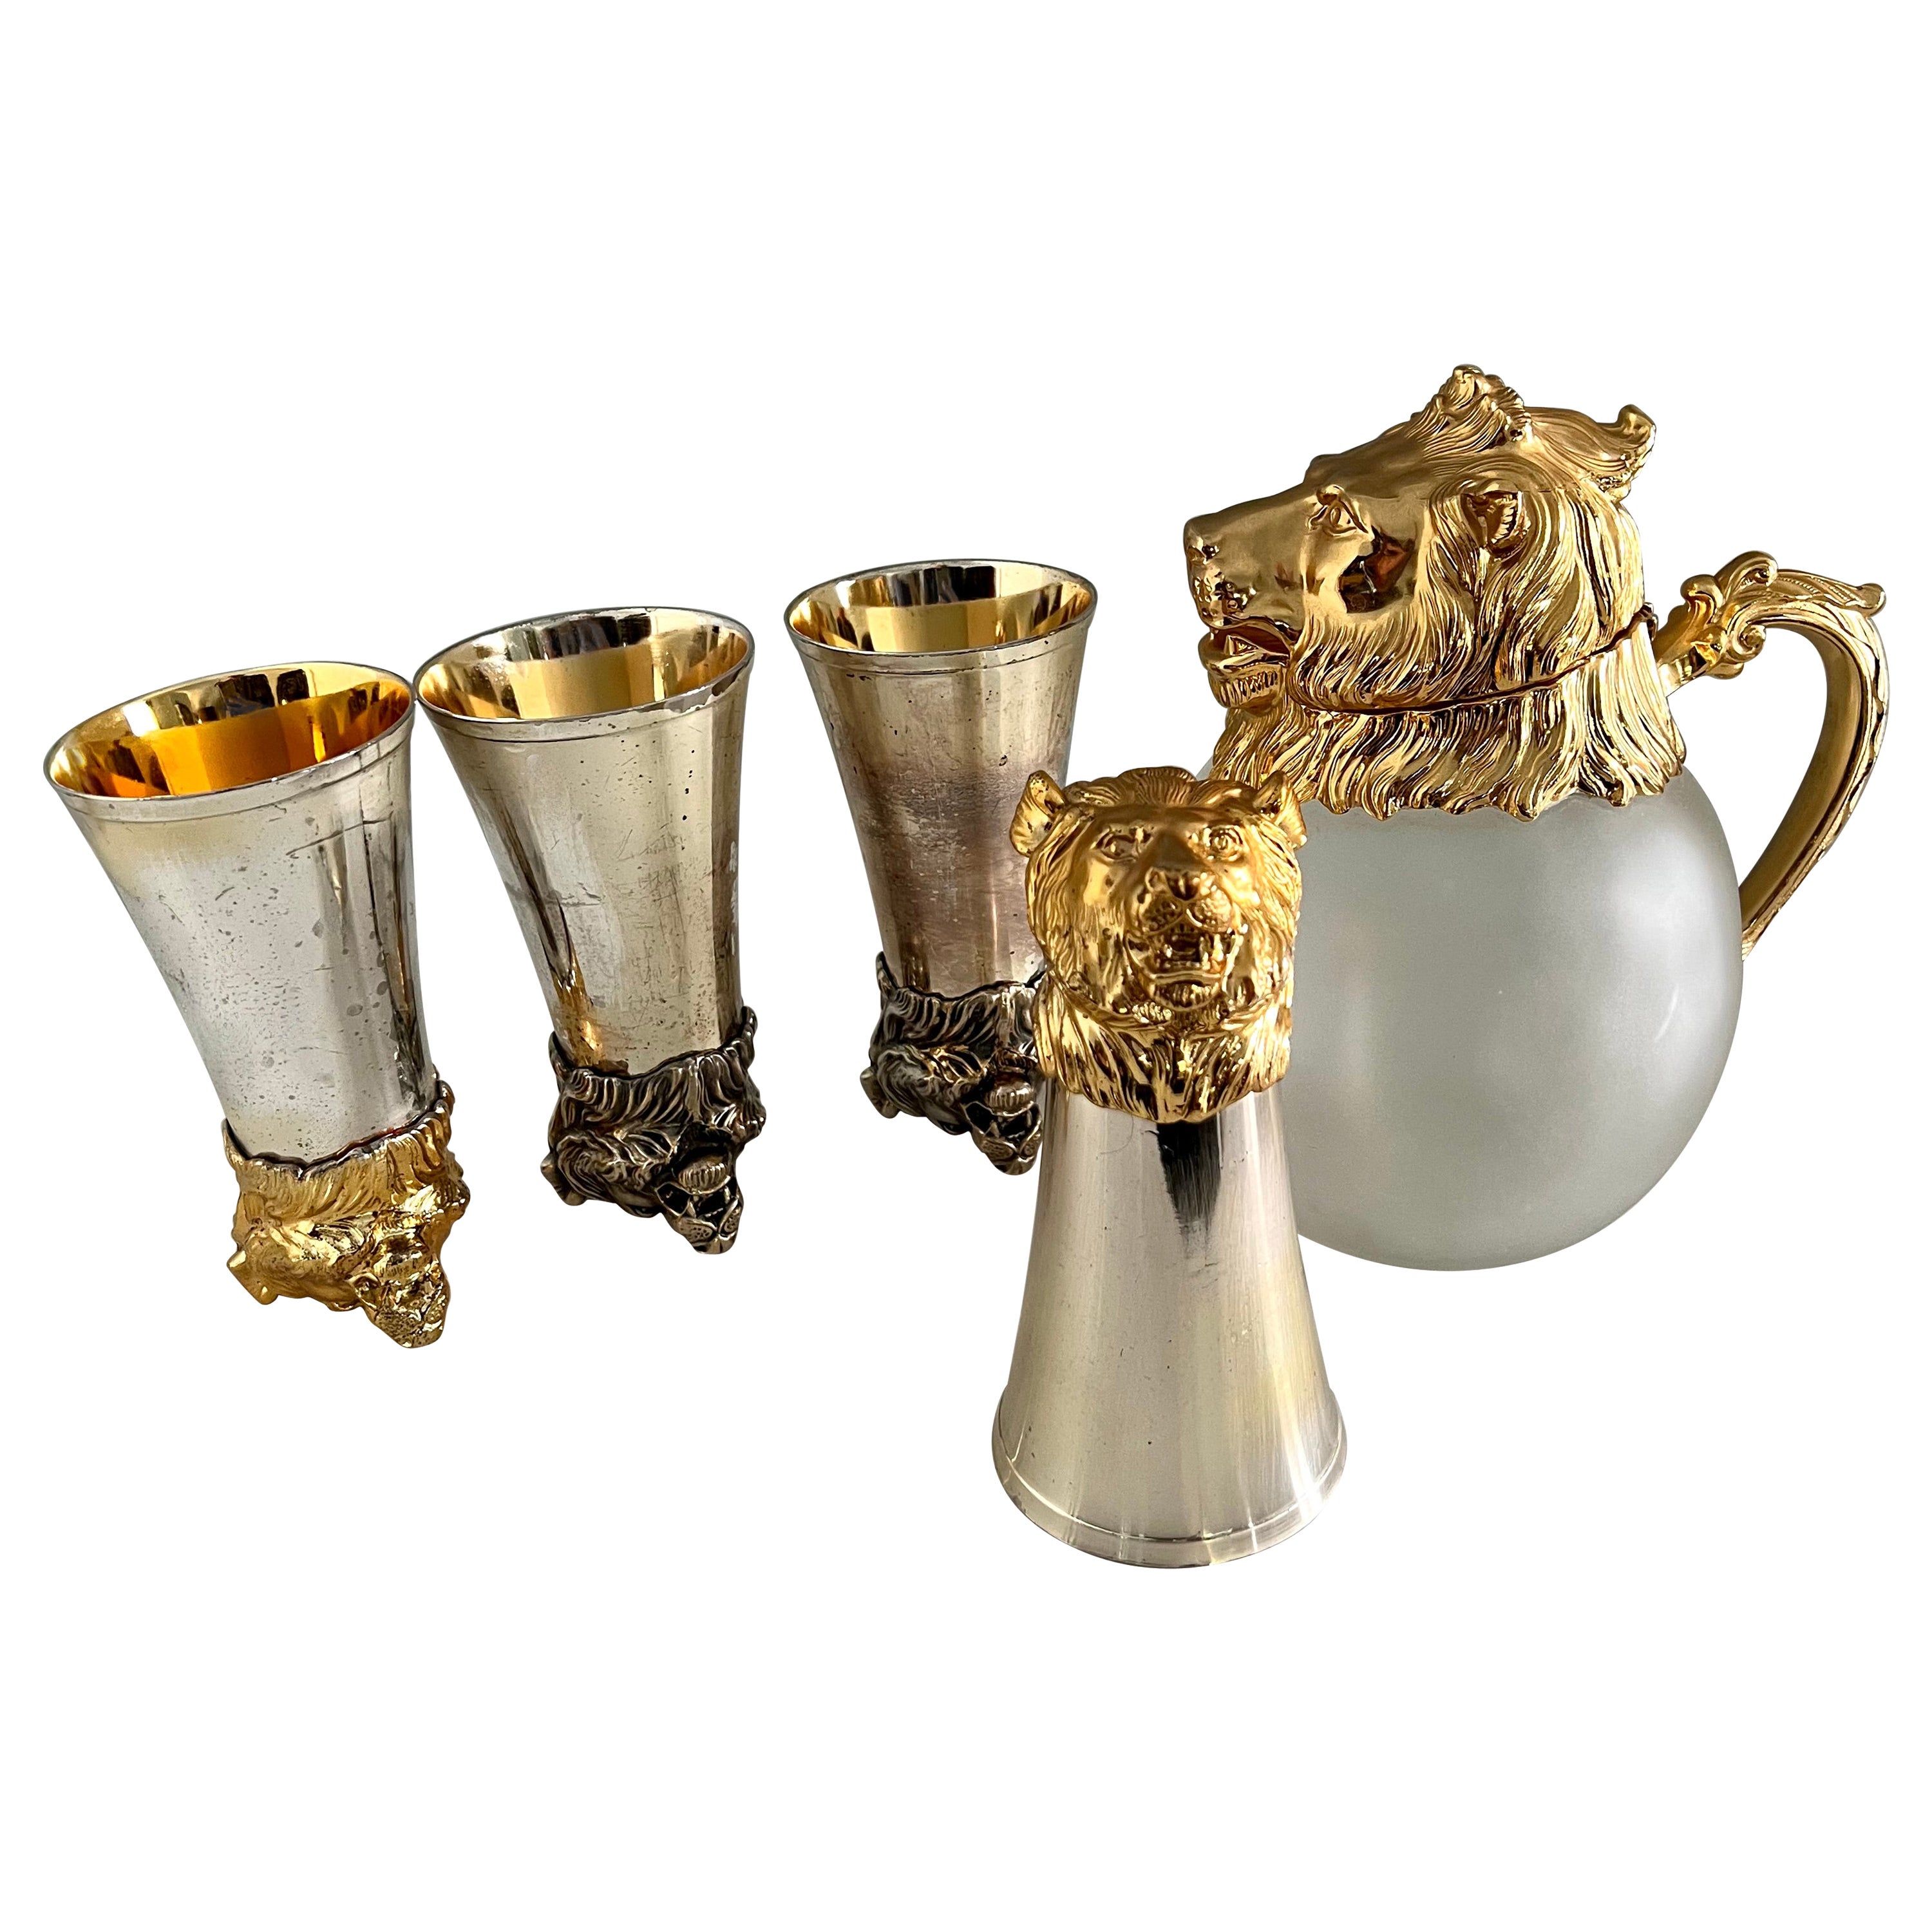 Set of Four Lion Stirrup Cups with Matching Lion Head Pitcher